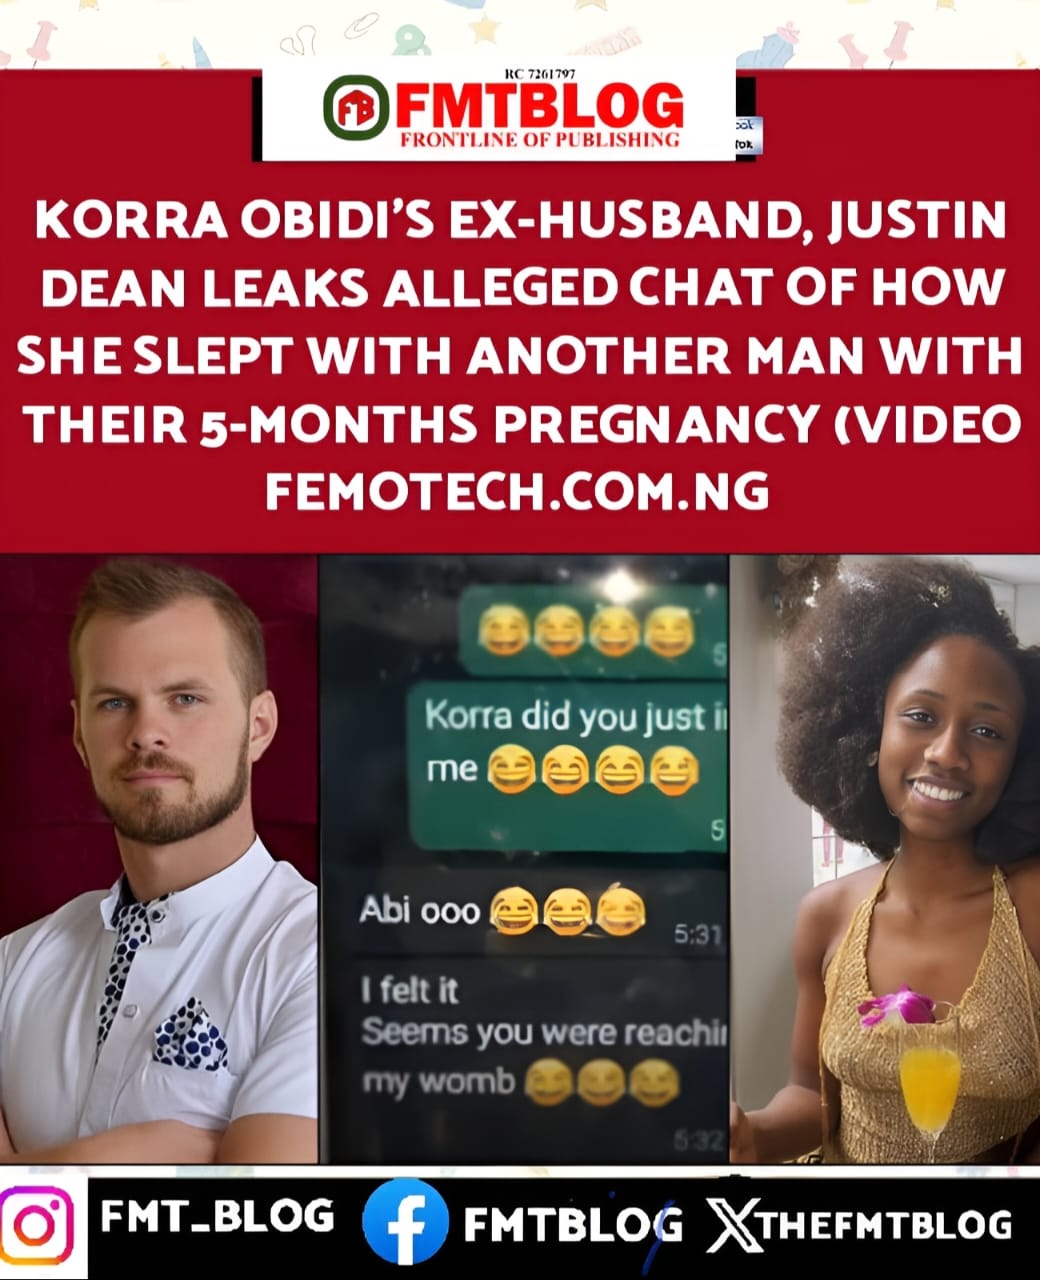 Korra Obidi’s Ex-Husband, Justin Dean, Leaks Alleged Chat Of How She Slept With Another Man With Their 5-Months Pregnancy (VIDEO)